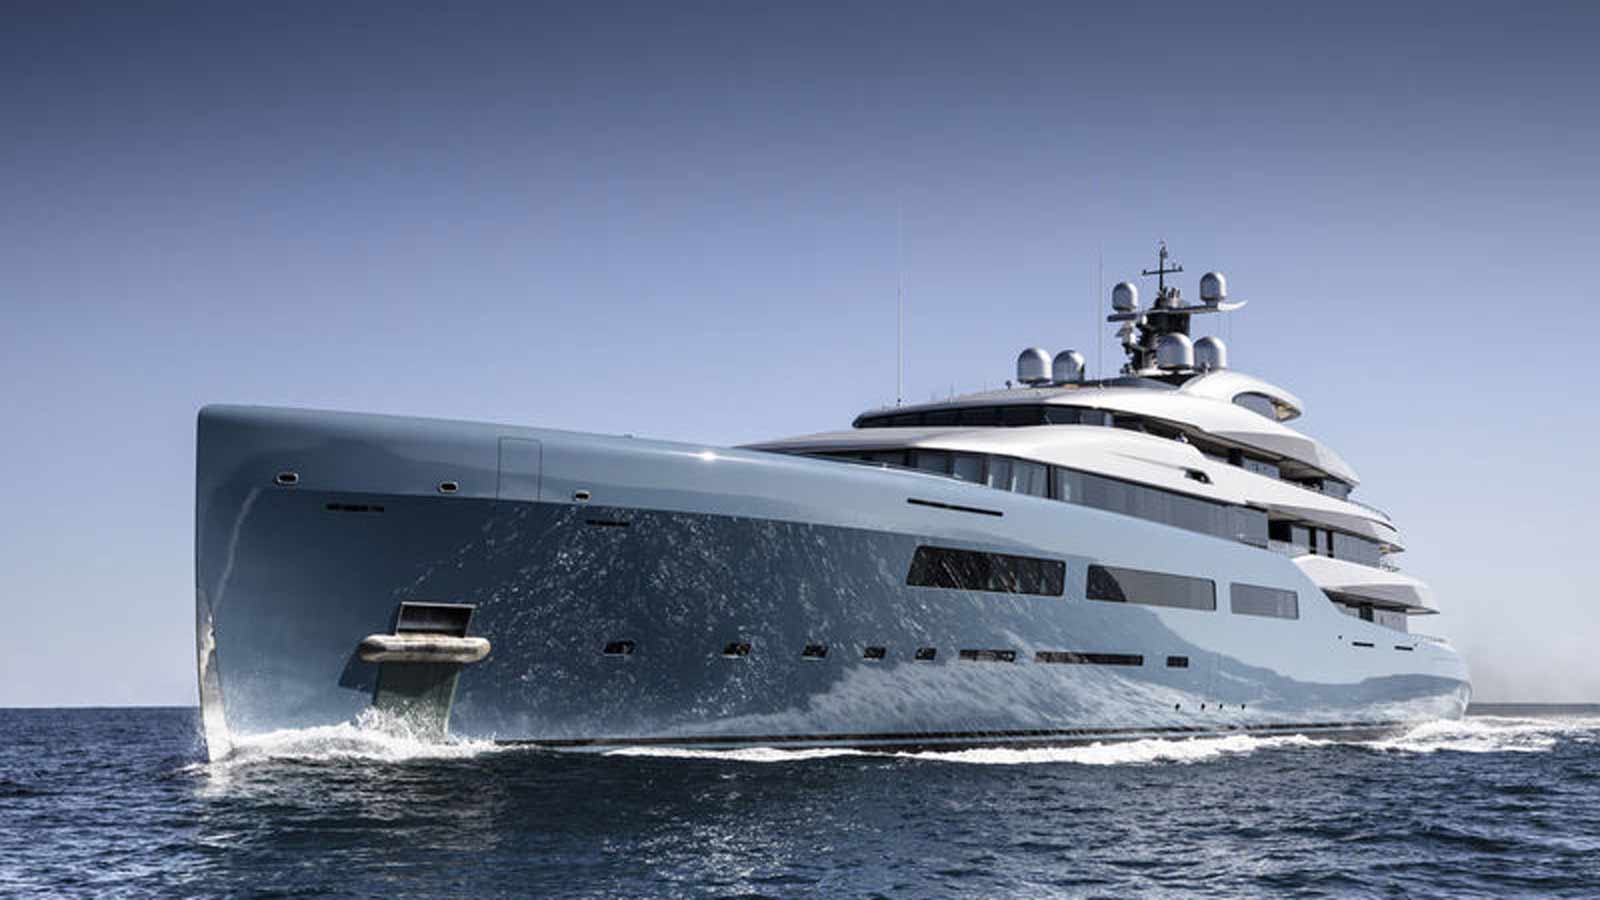 $220 Million Superyacht With Onboard Tennis Court Spotted In Holland